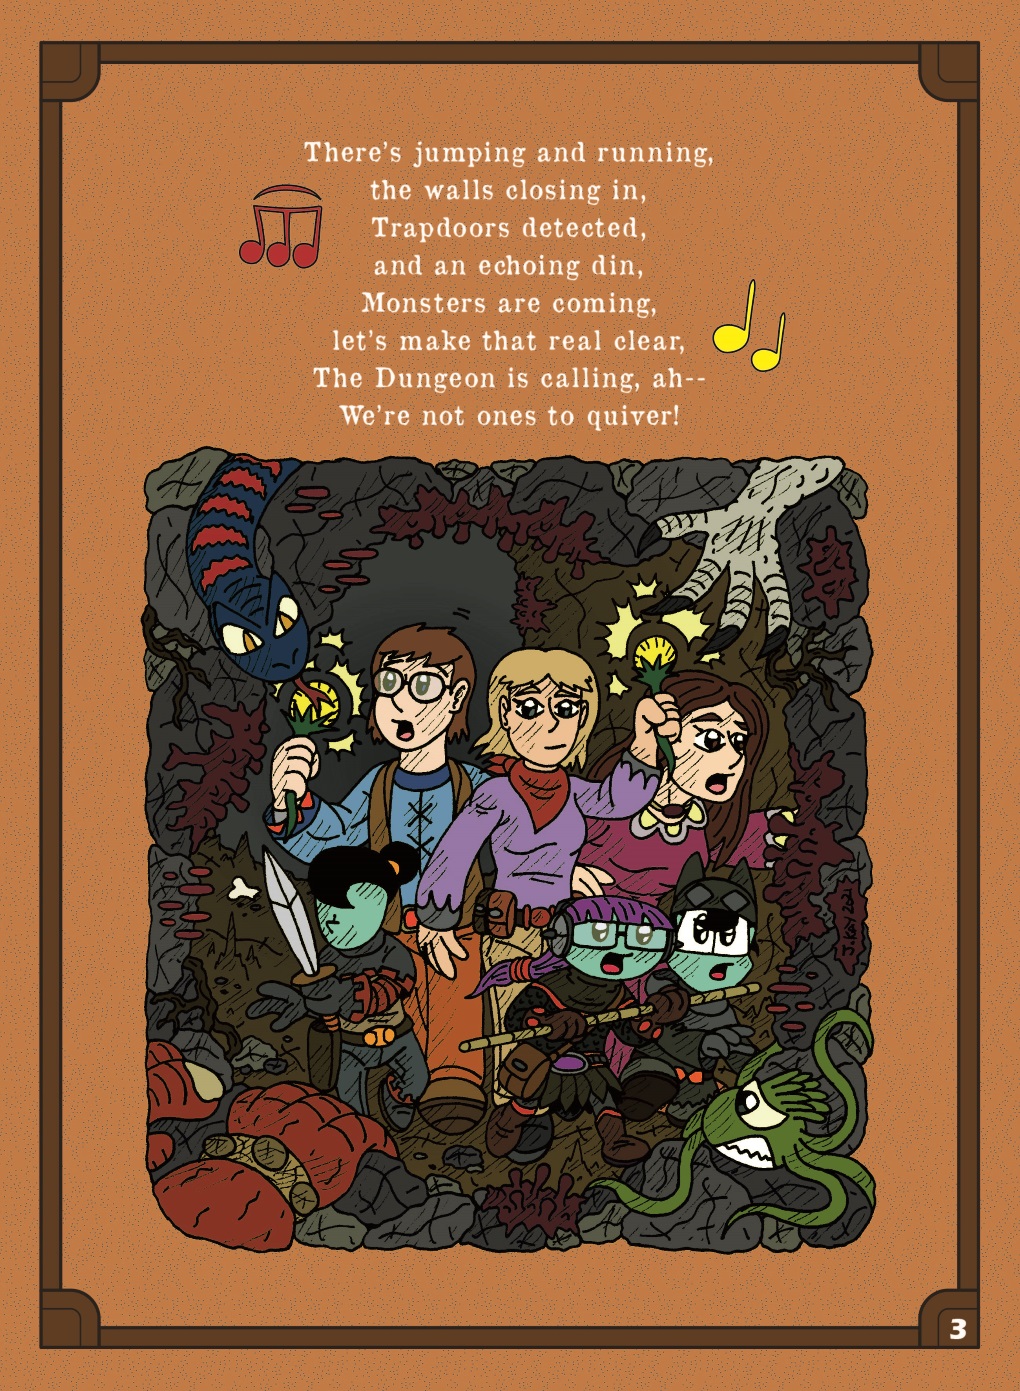 The Strangest Coven by Cartoonist_at_Large page 3 out of 8